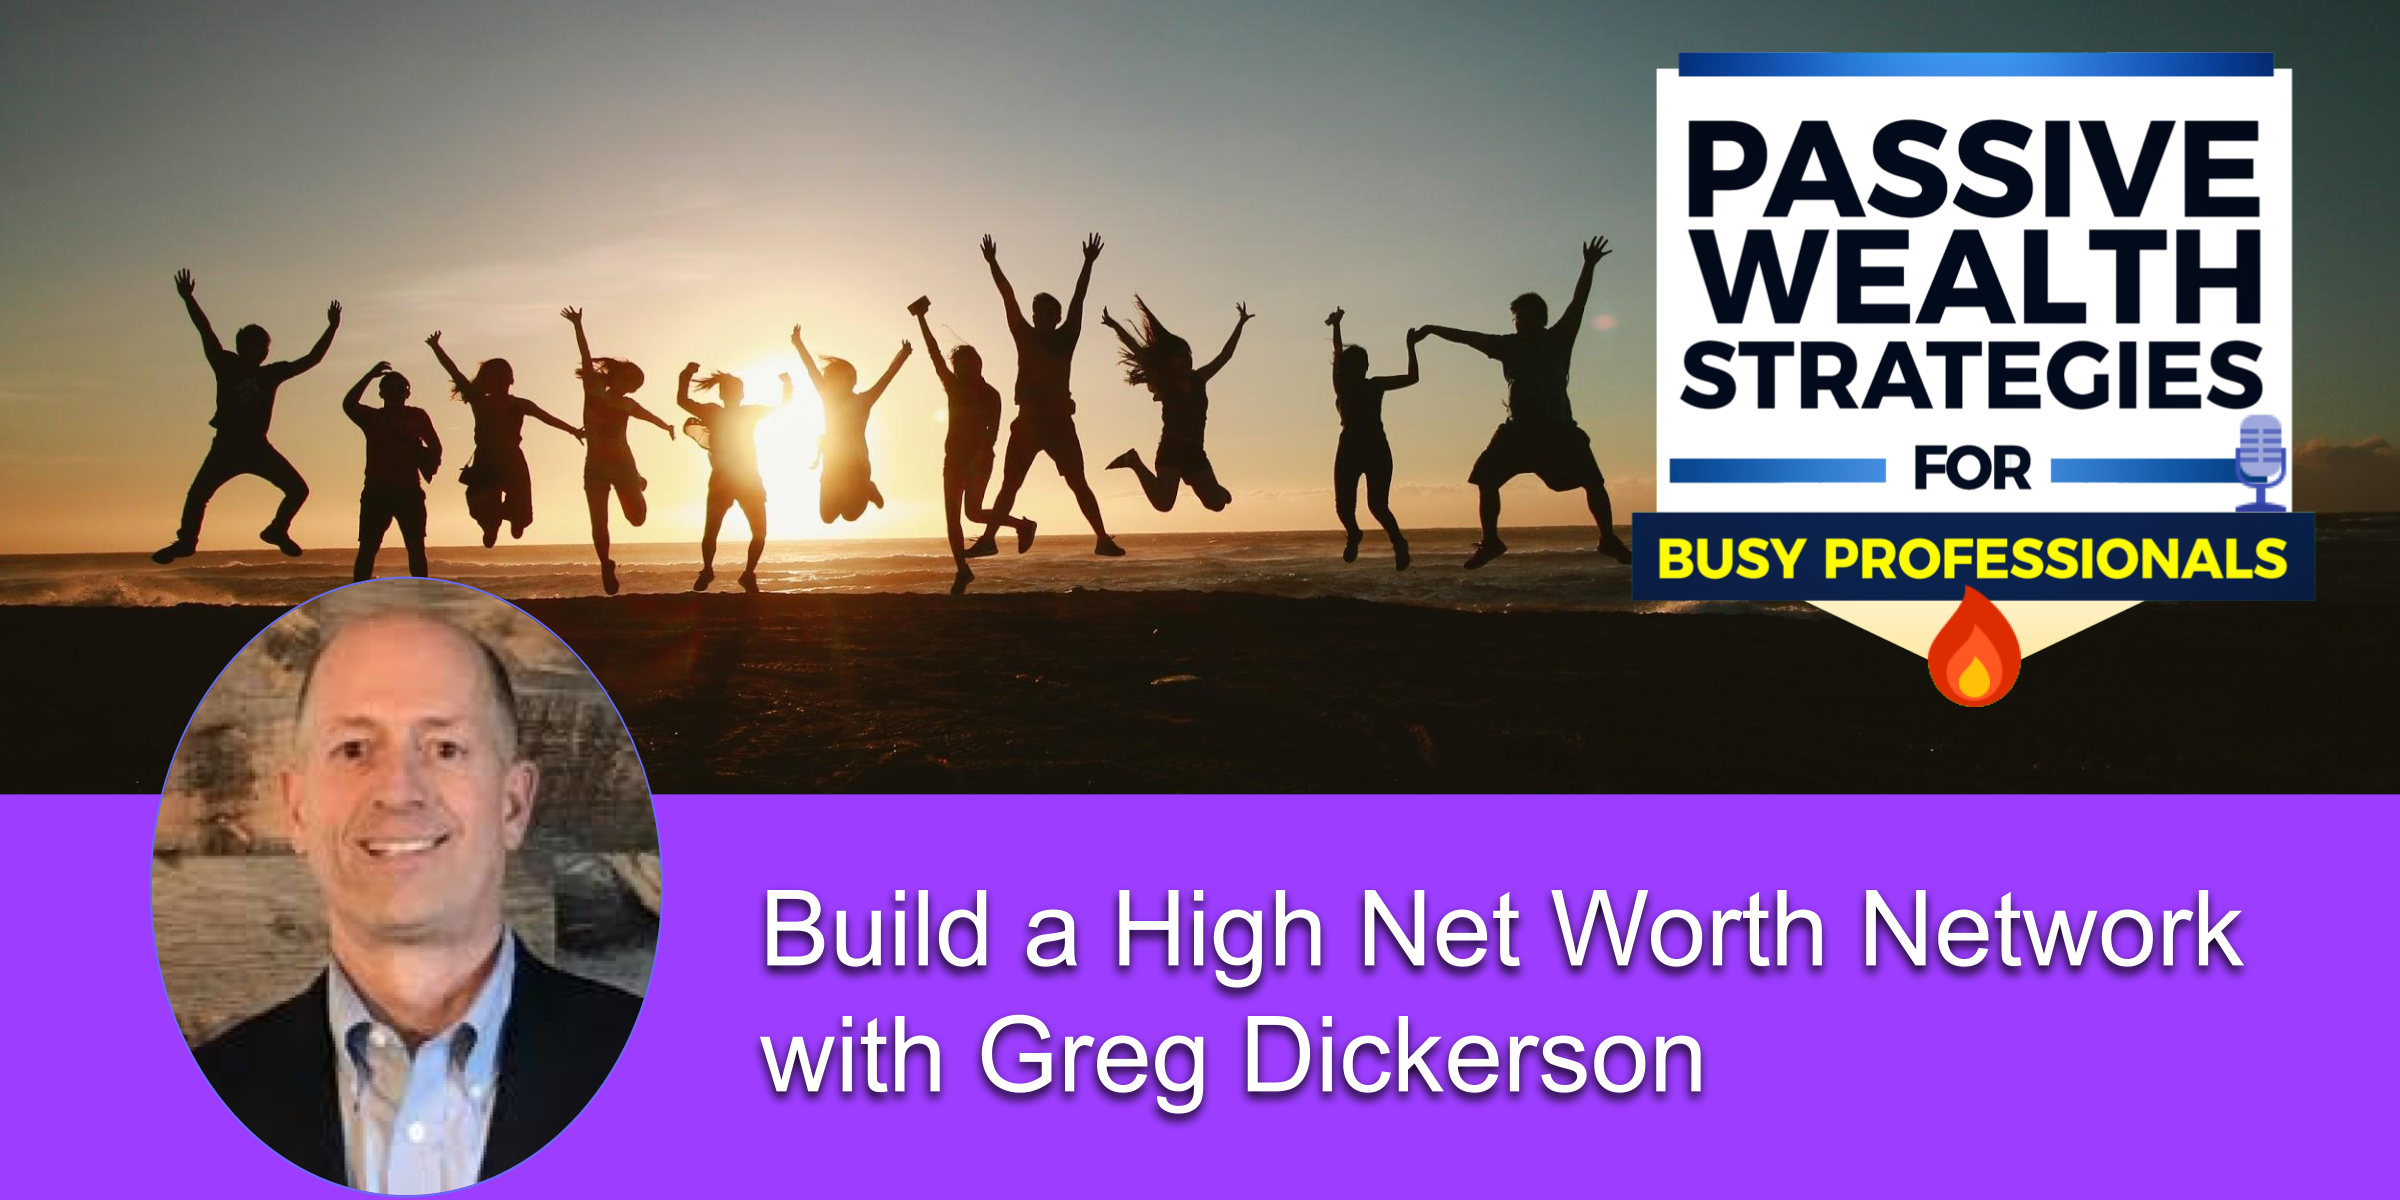 Build a High Net Worth Network with Greg Dickerson